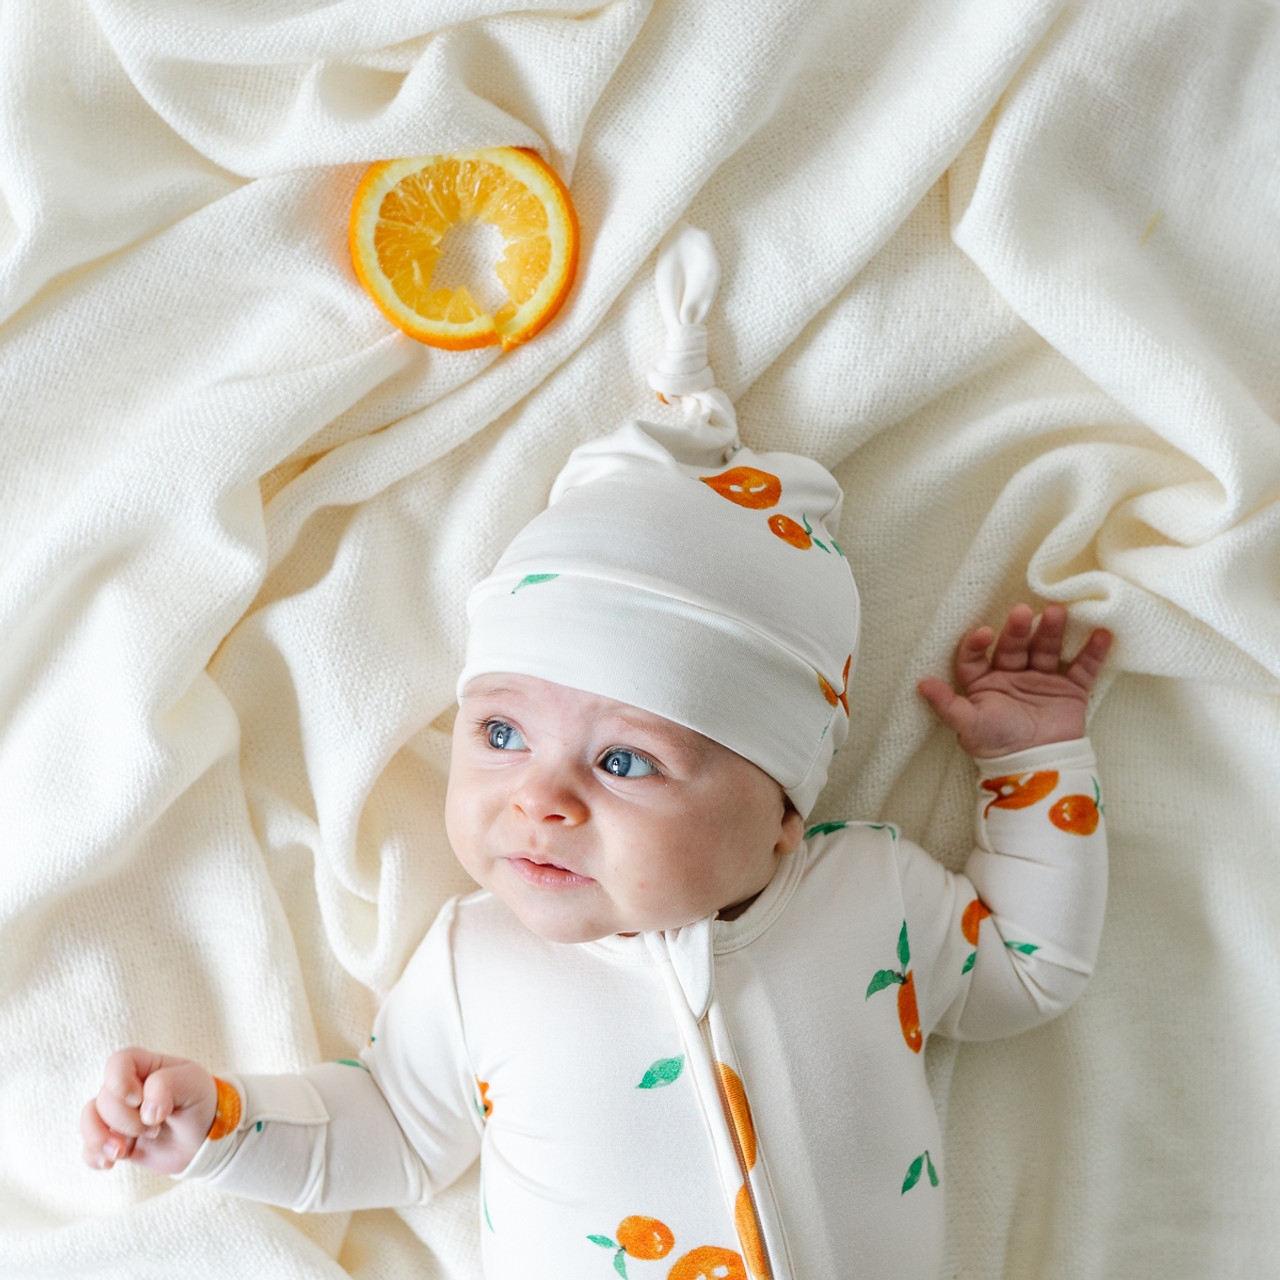 How Should I Dress My Newborn in Summer? - Active Baby Canadian